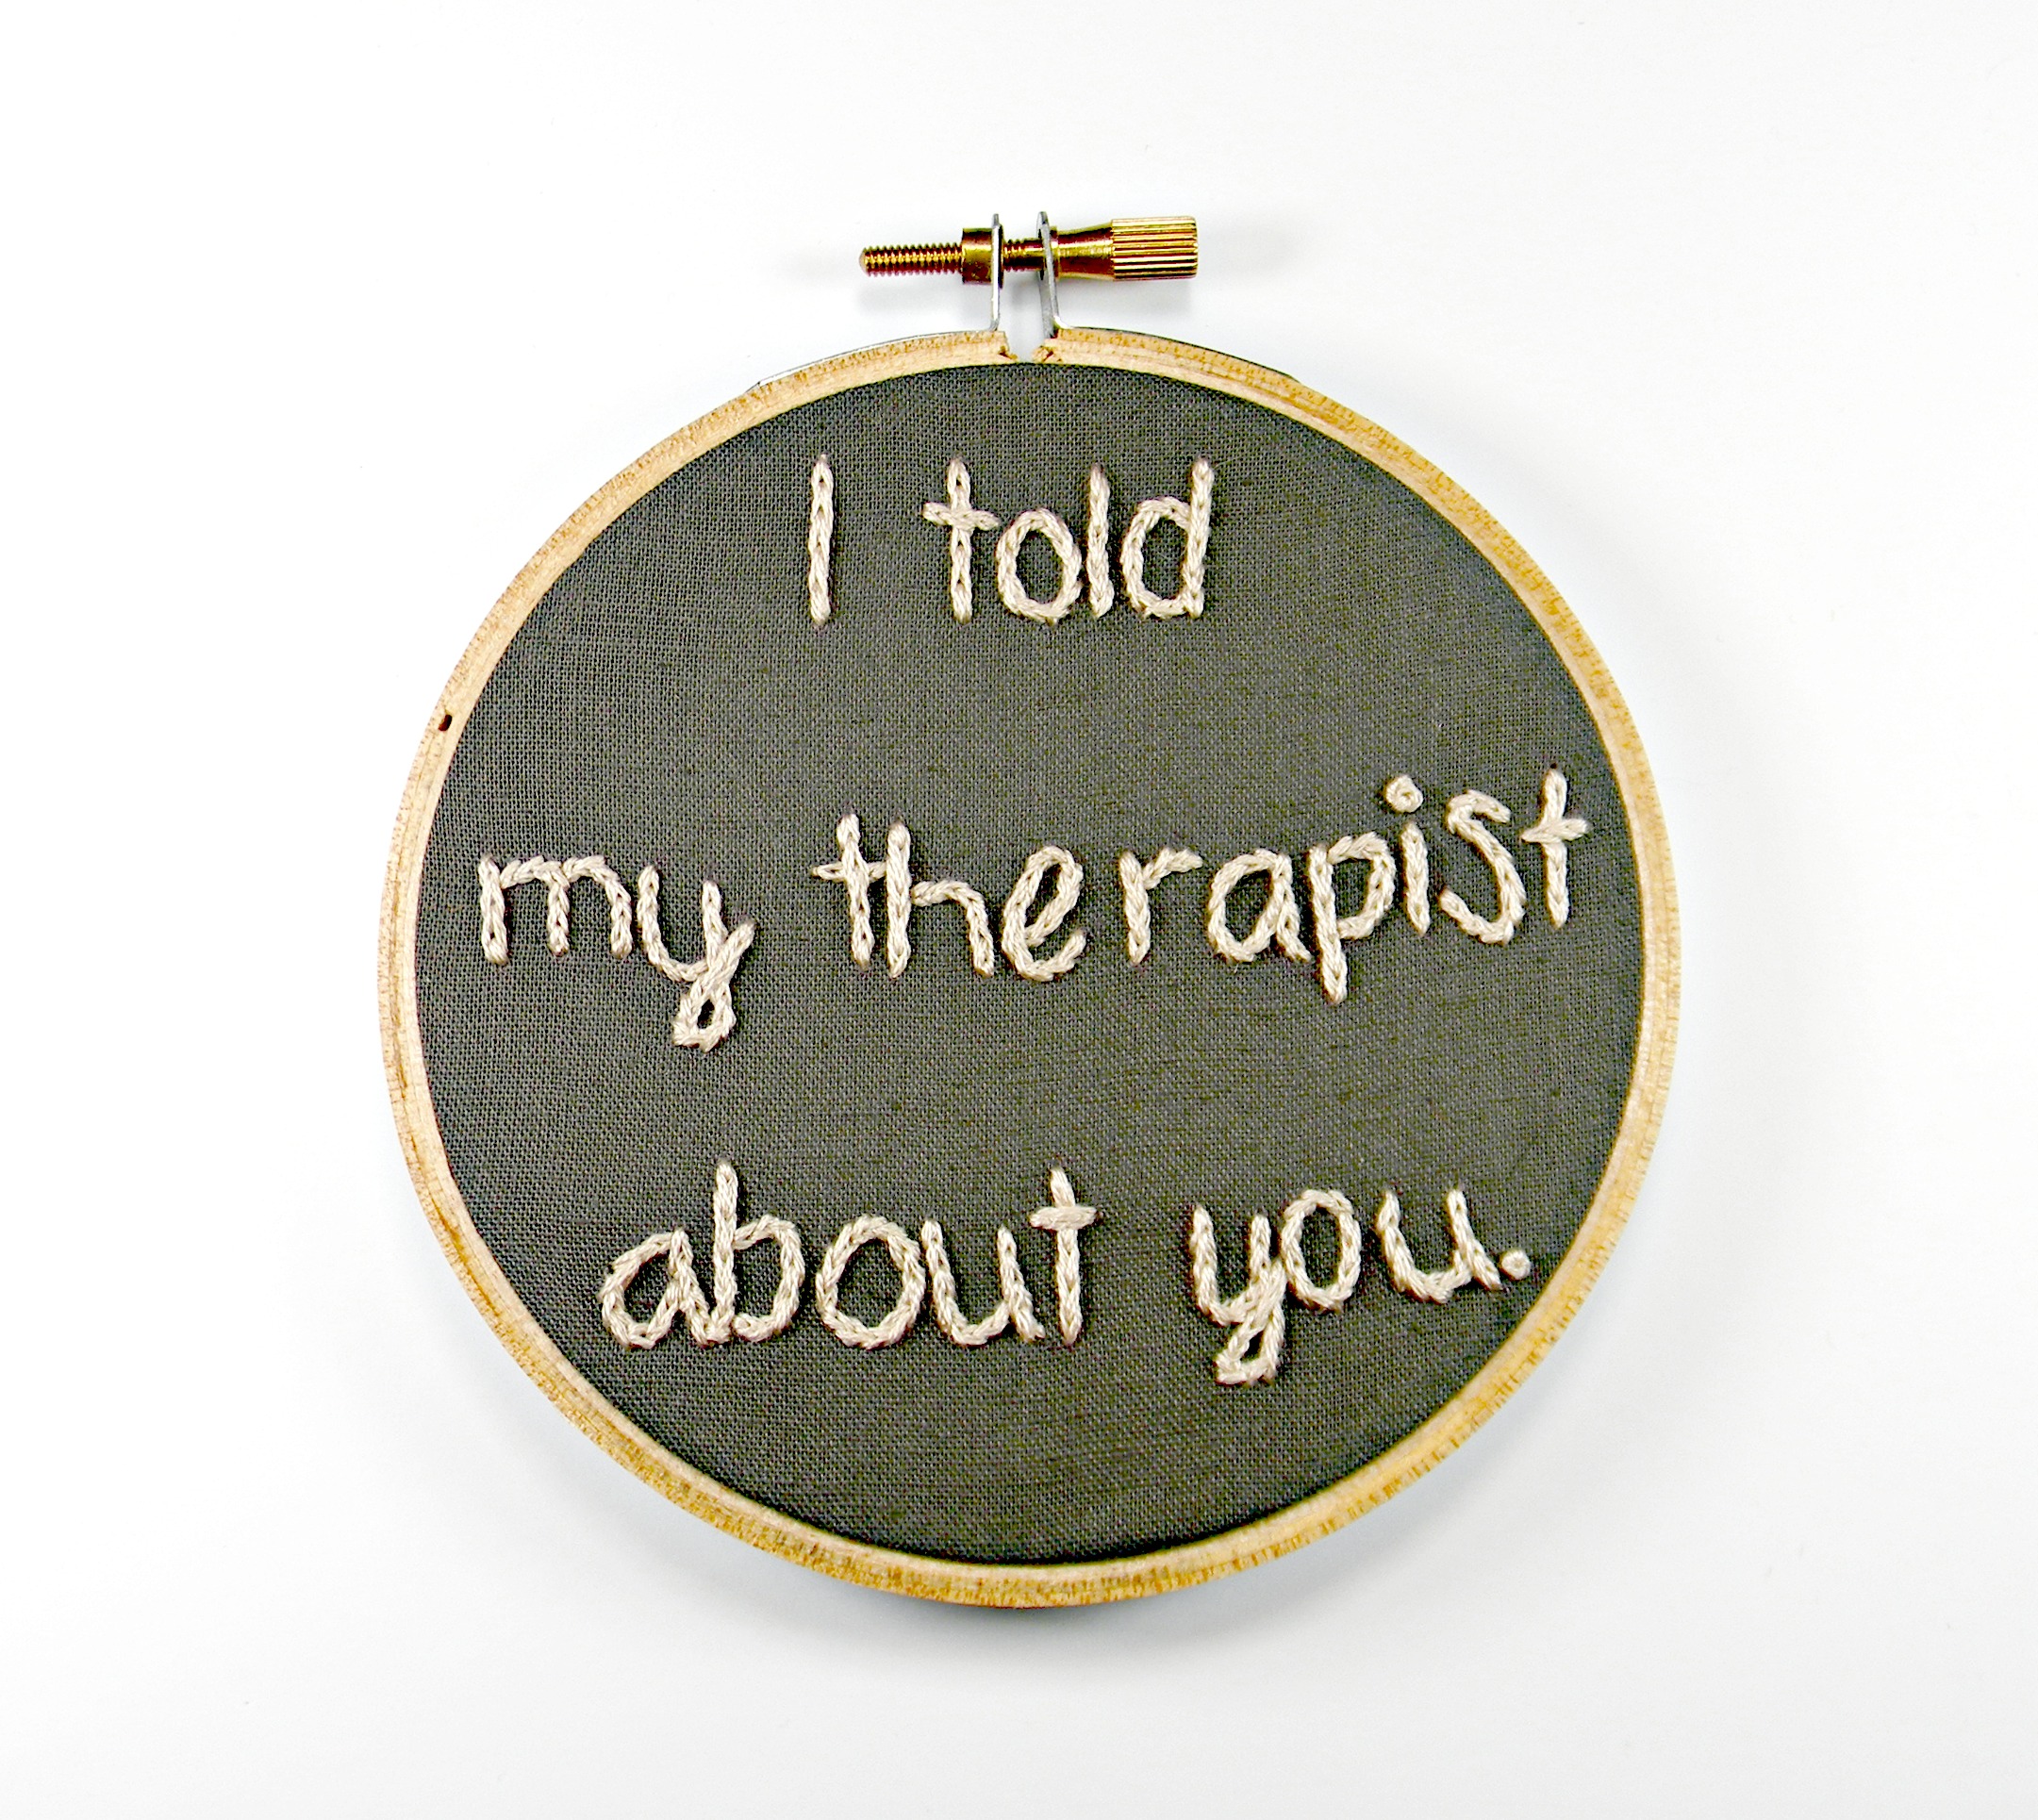 DSCN1989.jI Told My Therapist About You Embroidery Hoop Art